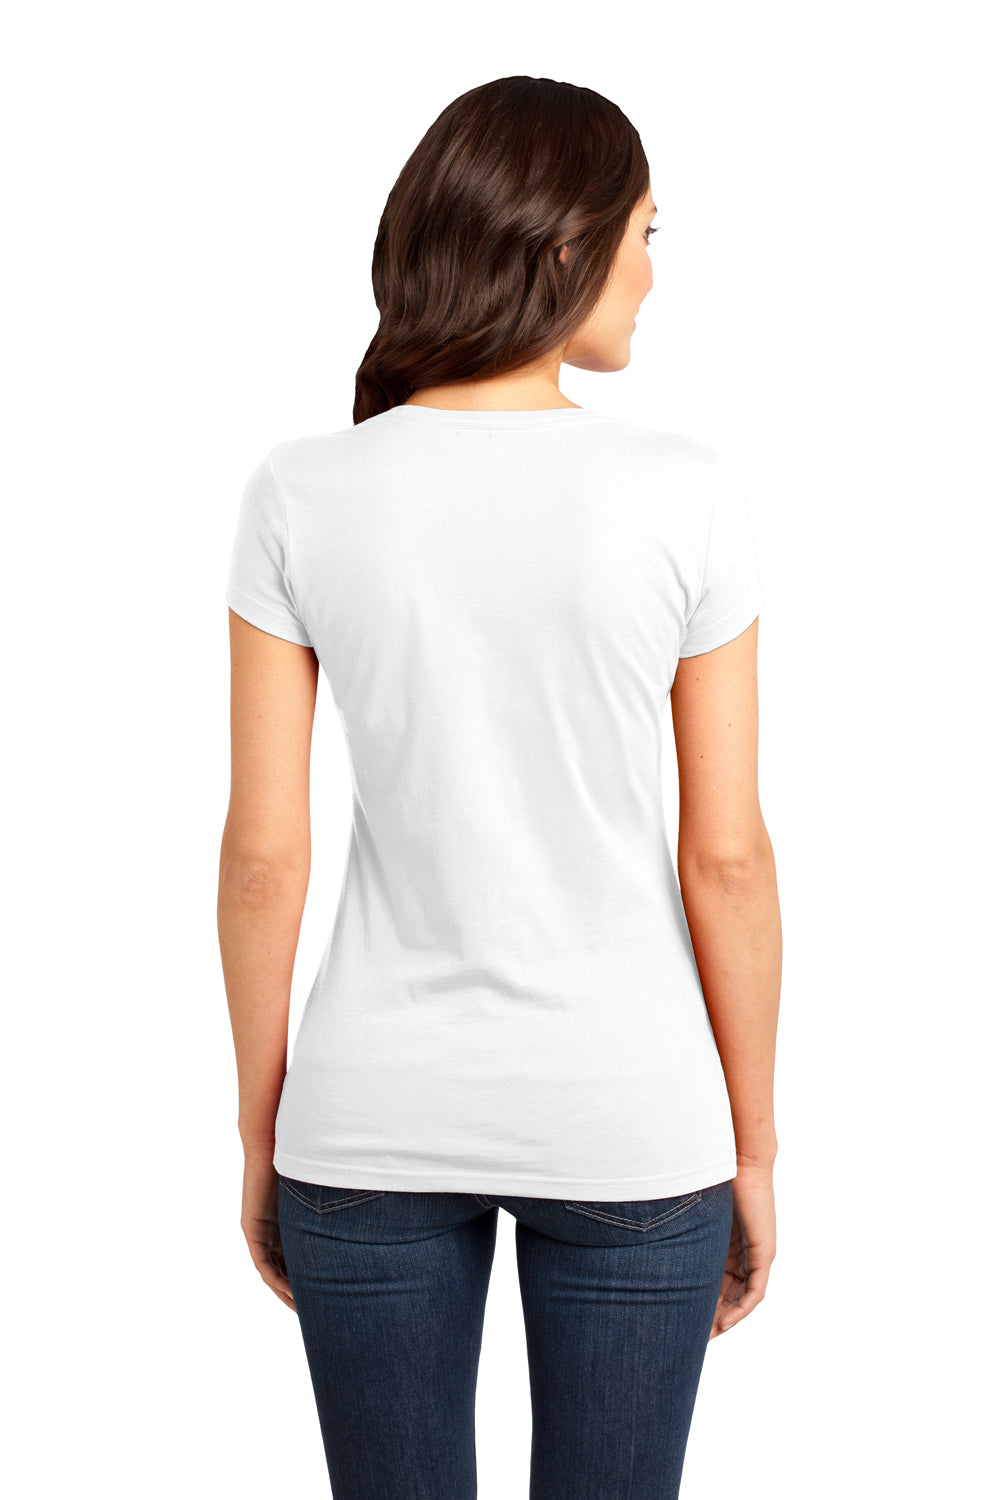 District DT6001 Womens Very Important Short Sleeve Crewneck T-Shirt White Back